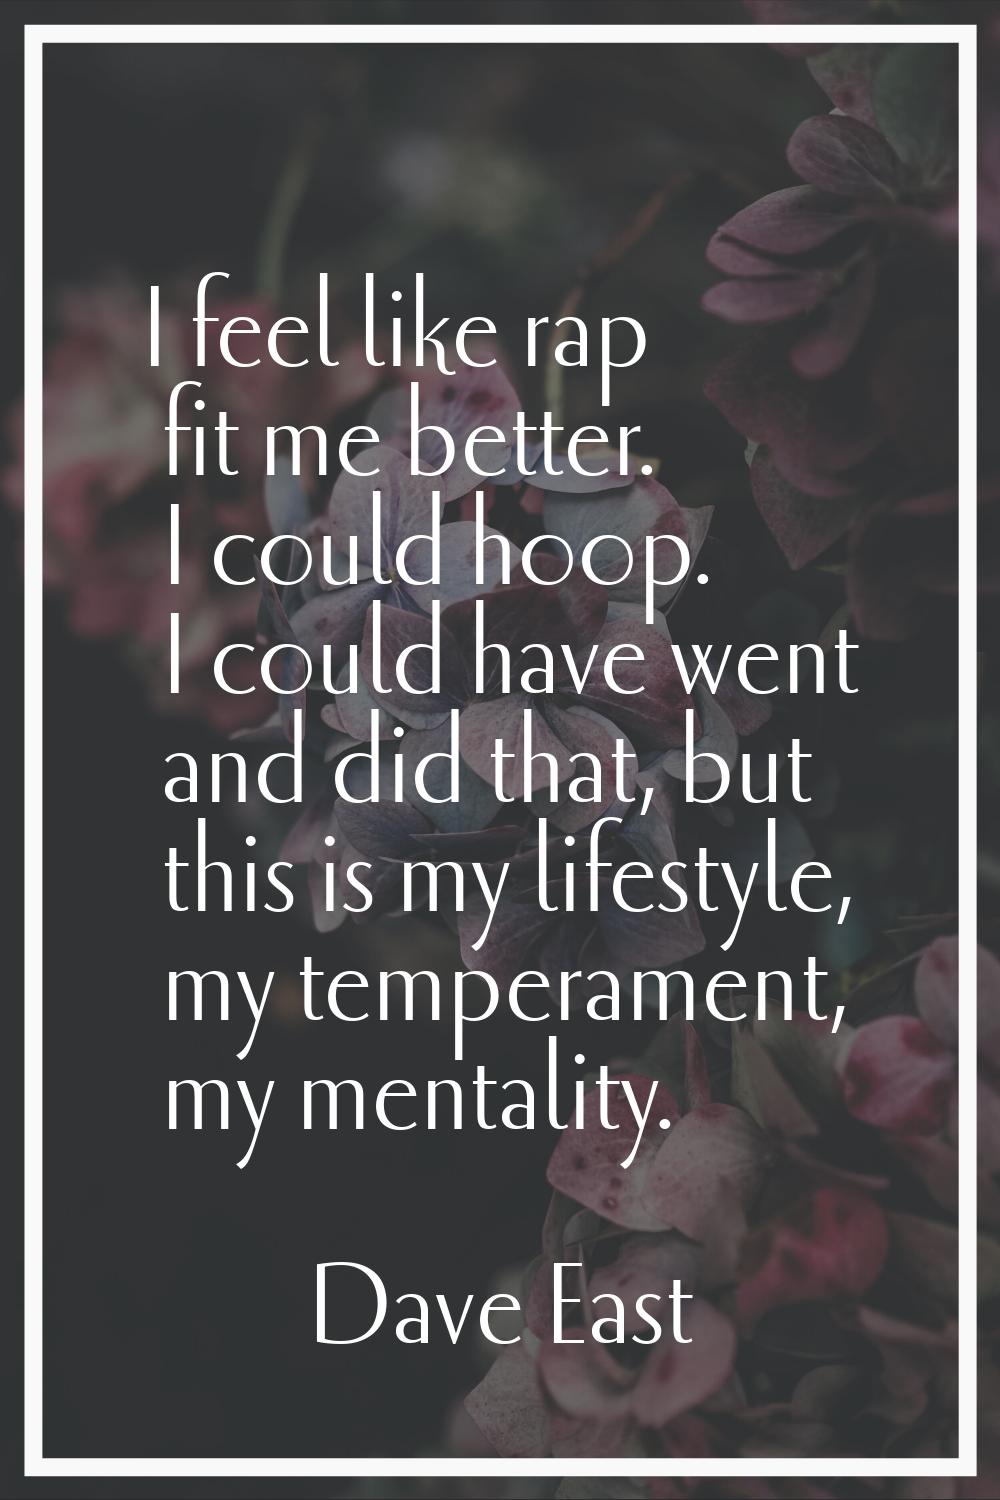 I feel like rap fit me better. I could hoop. I could have went and did that, but this is my lifesty